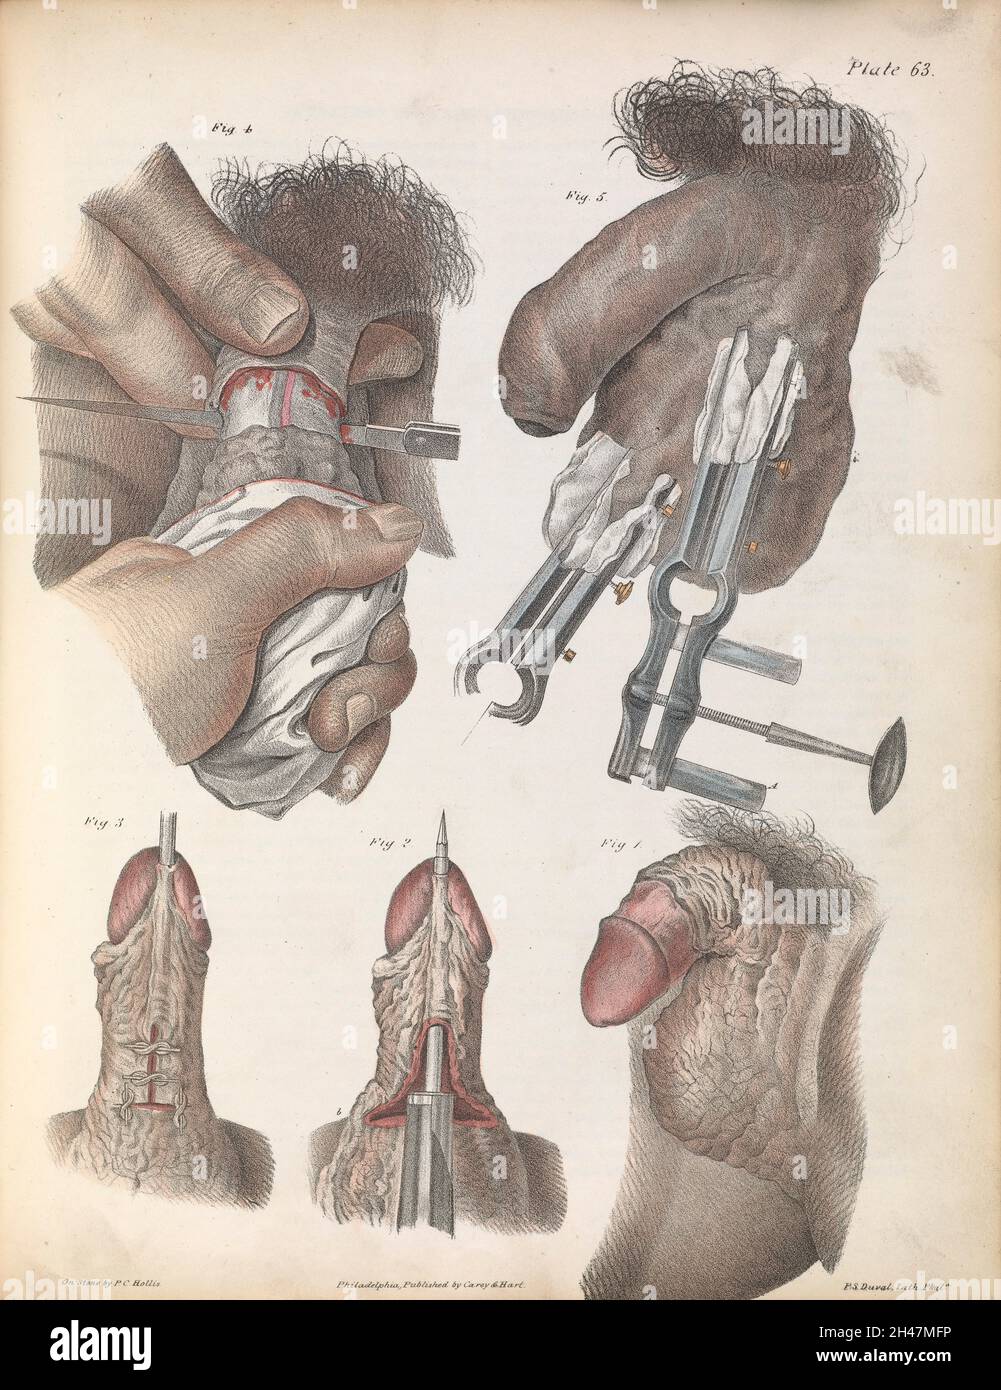 Plate LXIII. Surgical techniques performed on male genitalia. Stock Photo